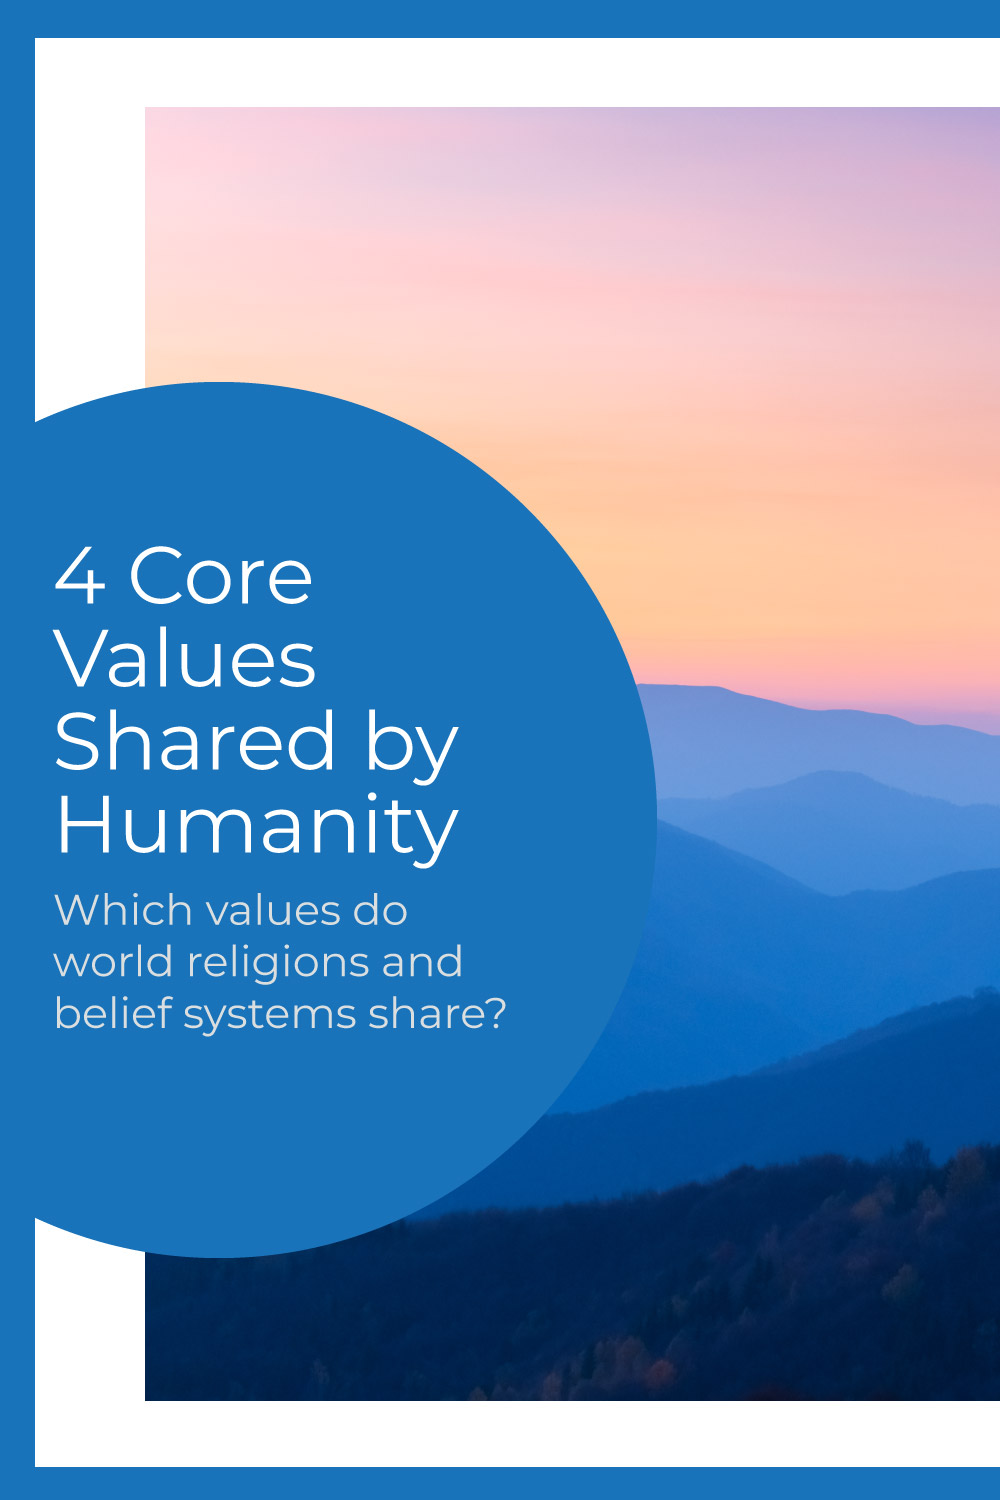 4 Core Values Shared by World Religions and Beliefs in Common